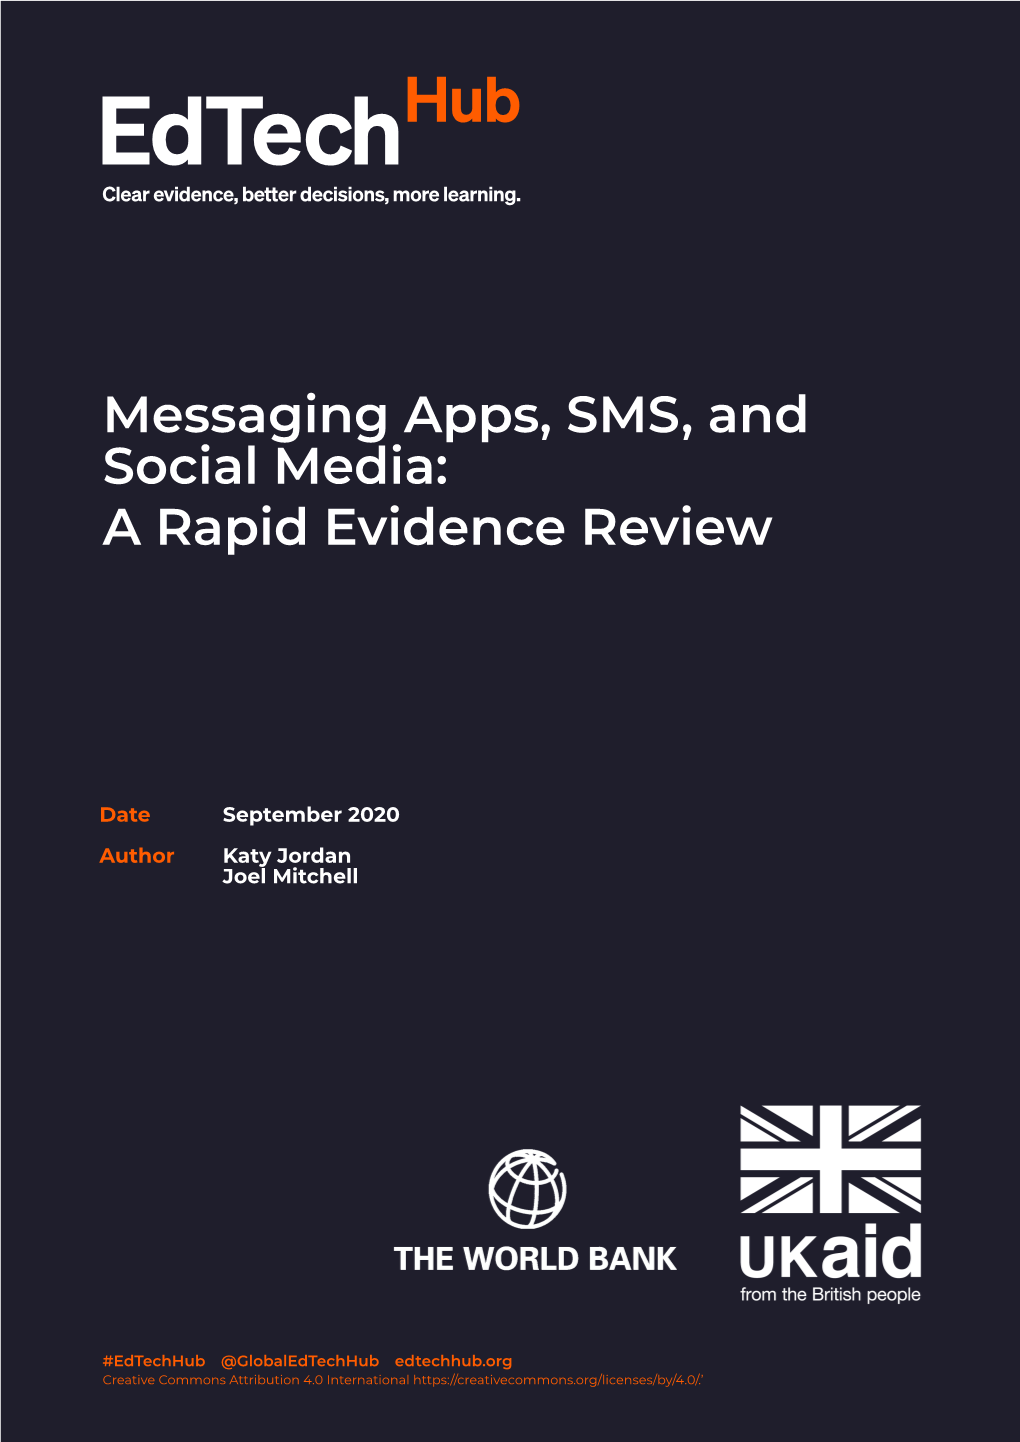 Messaging Apps, SMS, and Social Media: a Rapid Evidence Review